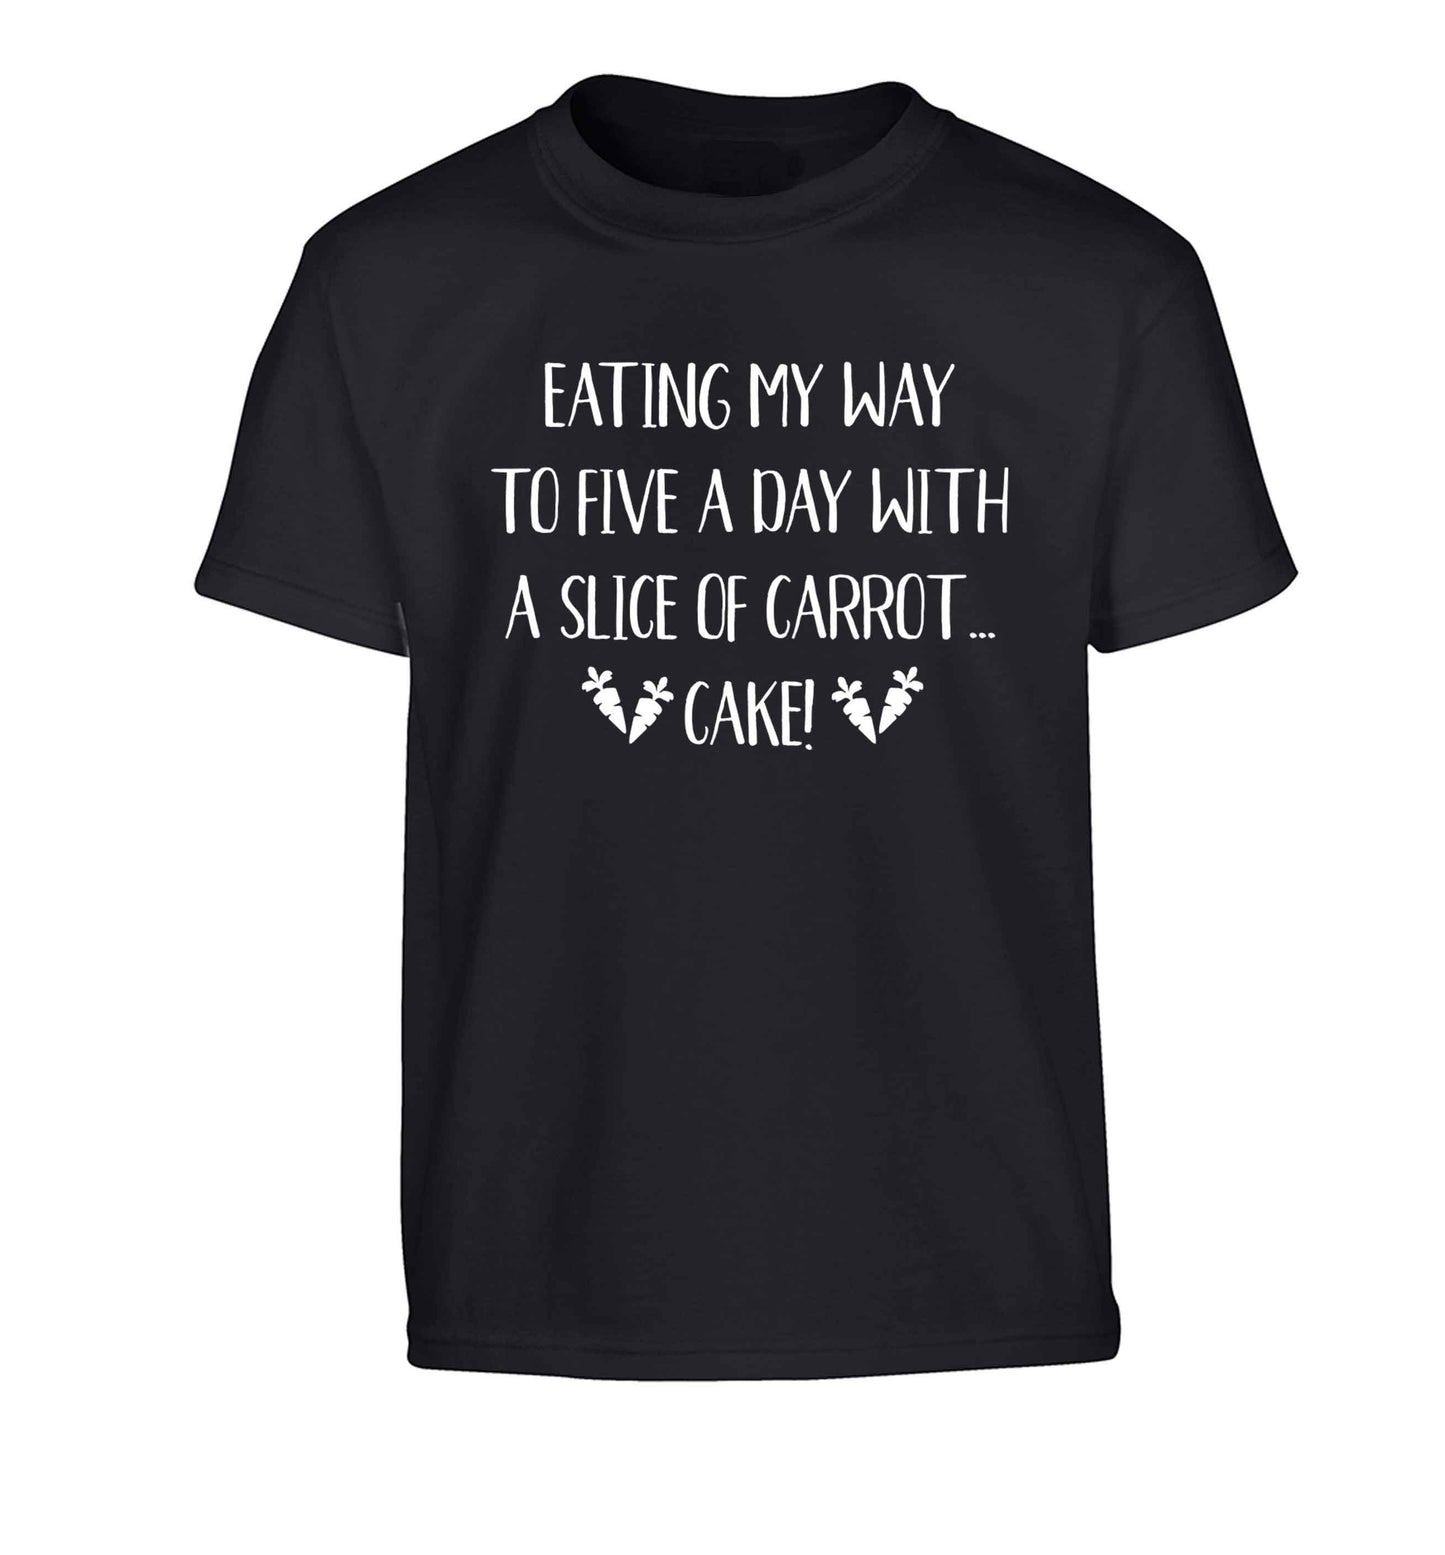 Eating my way to five a day with a slice of carrot cake day Children's black Tshirt 12-13 Years